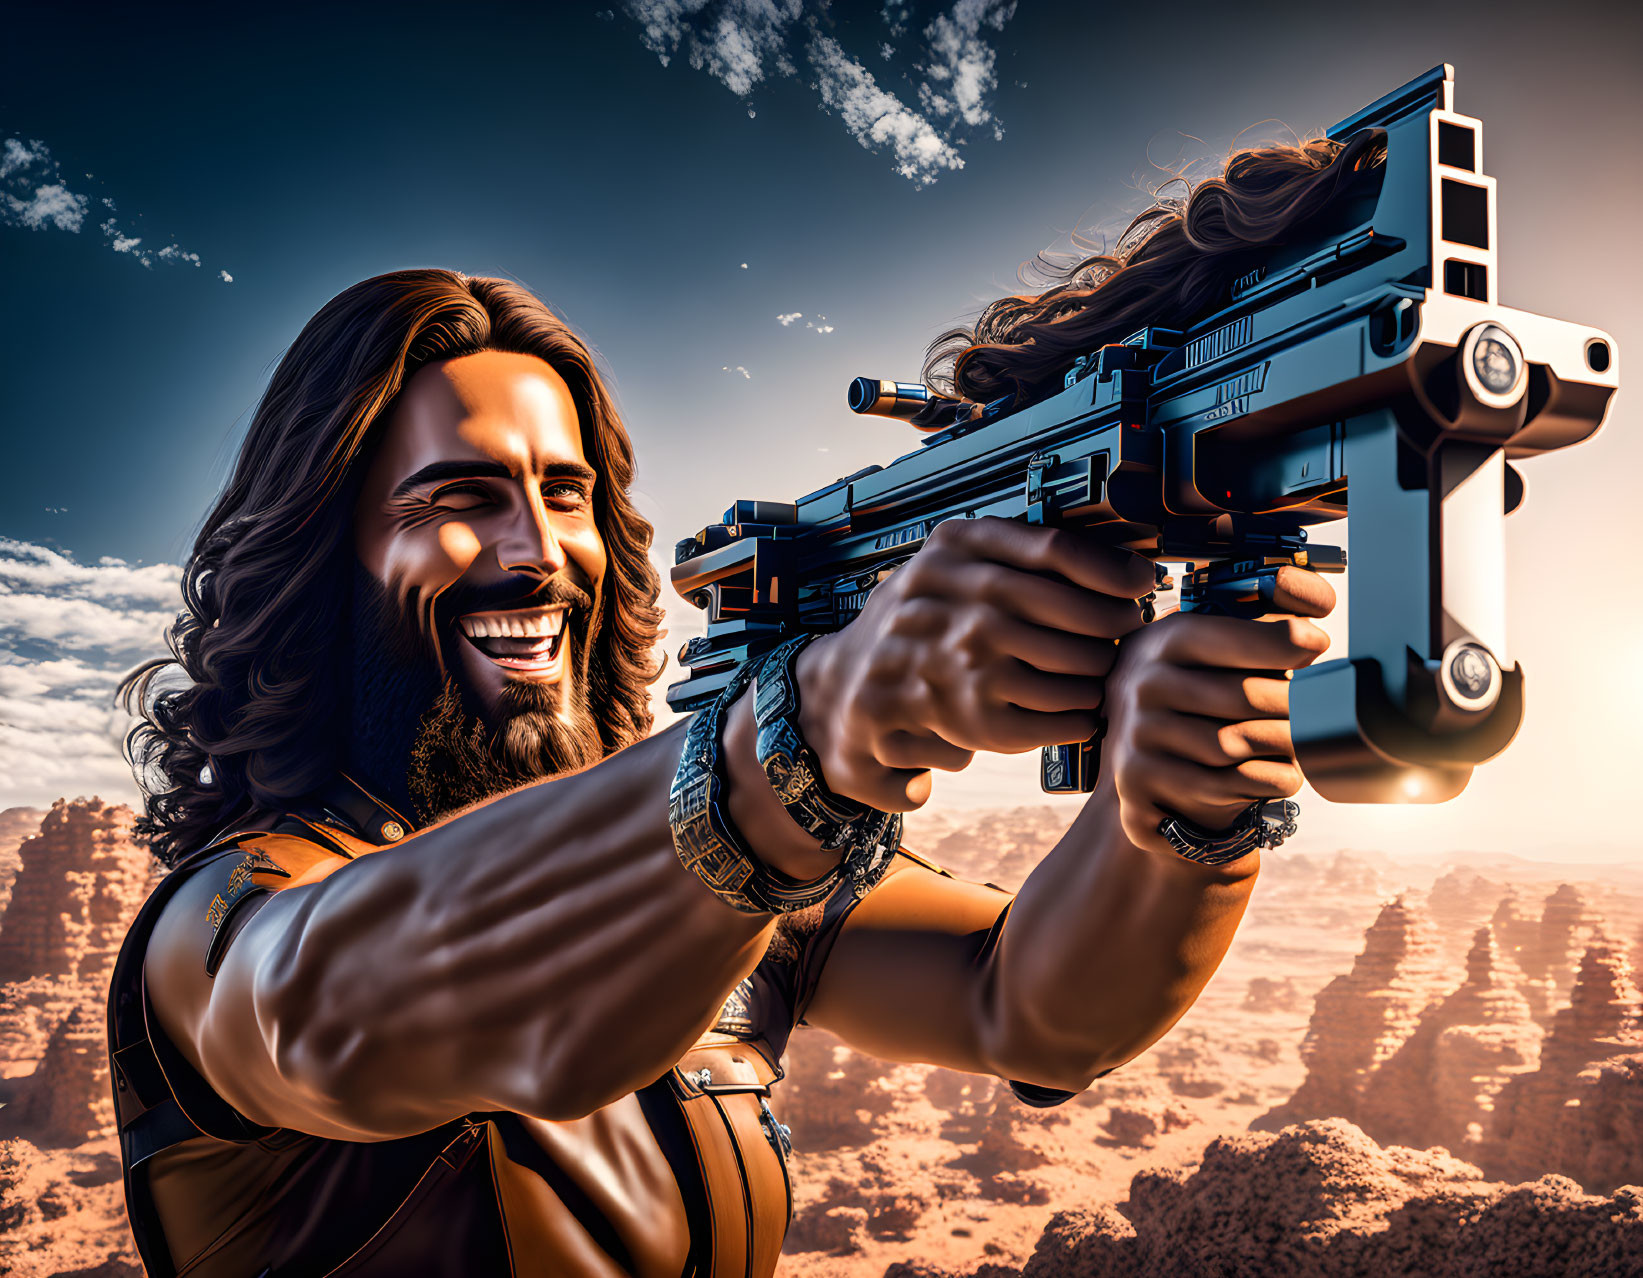 Illustration of bearded man with futuristic guns in dramatic setting